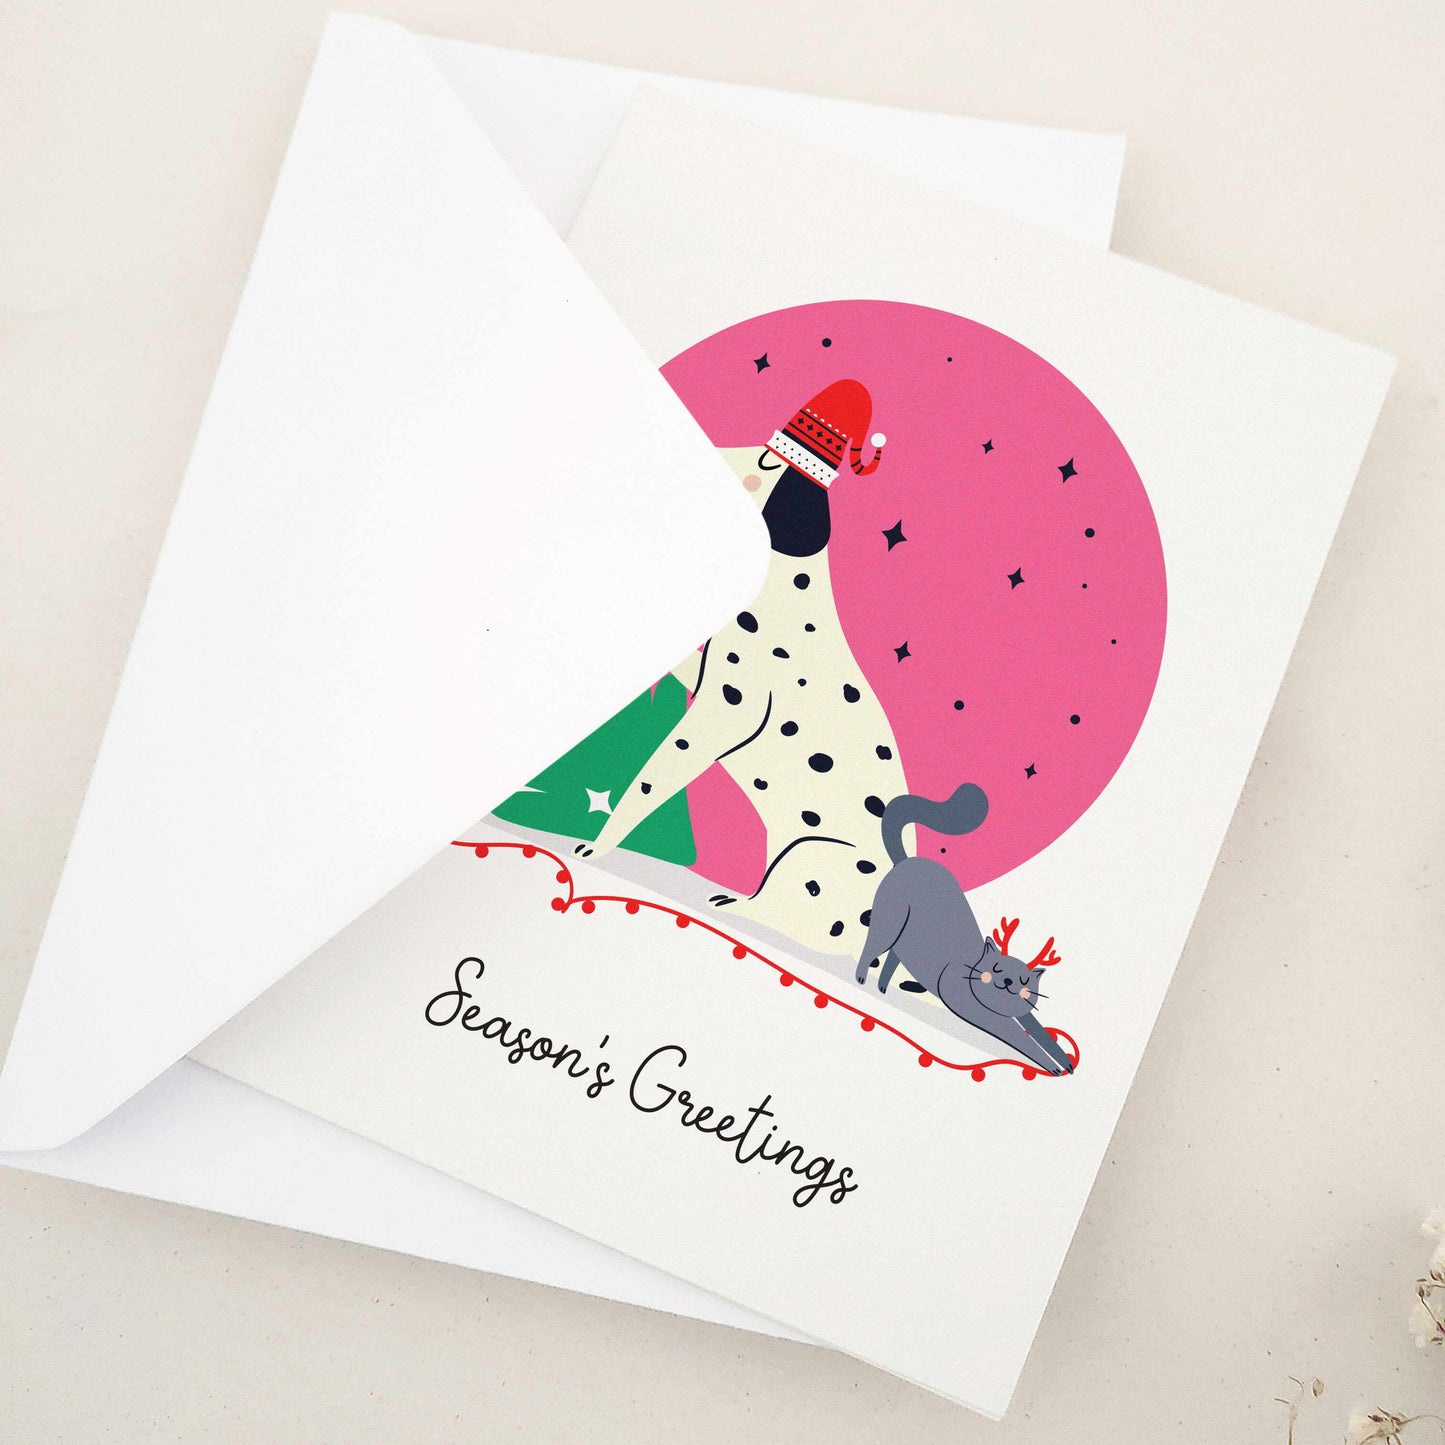 Unleash the holiday spirit with our adorable 'Season's Greetings' card, featuring a festive spotted dog and a cheerful companion decorating a Christmas tree under a starry night sky, perfect for dog lovers and fans of playful designs.